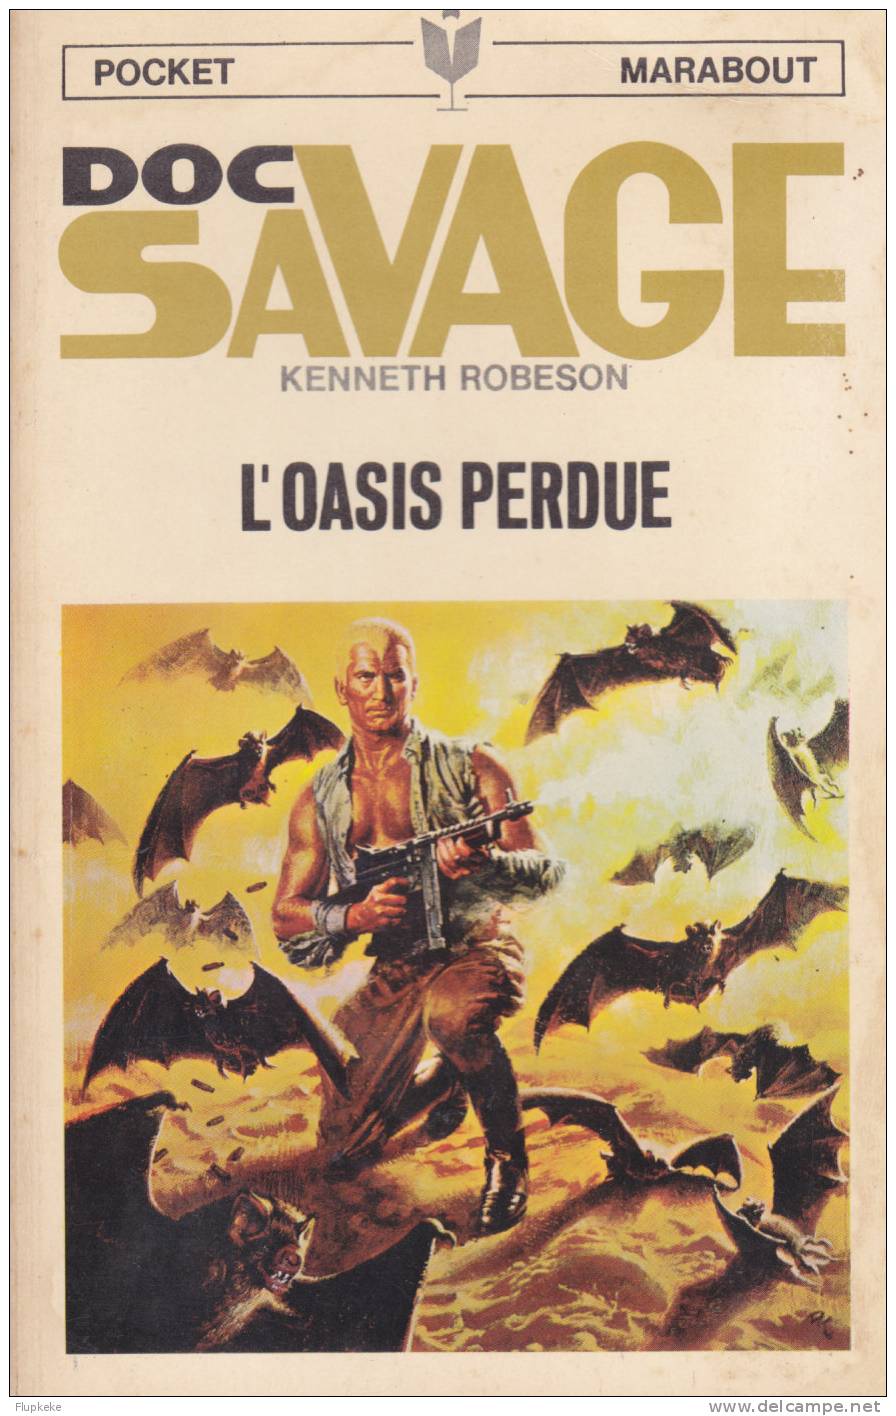 Pocket Marabout 33 Doc Savage L´Oasis Perdue Kenneth Robeson 1967 Couverture Jim Bama Illustrations Lievens - Marabout Junior